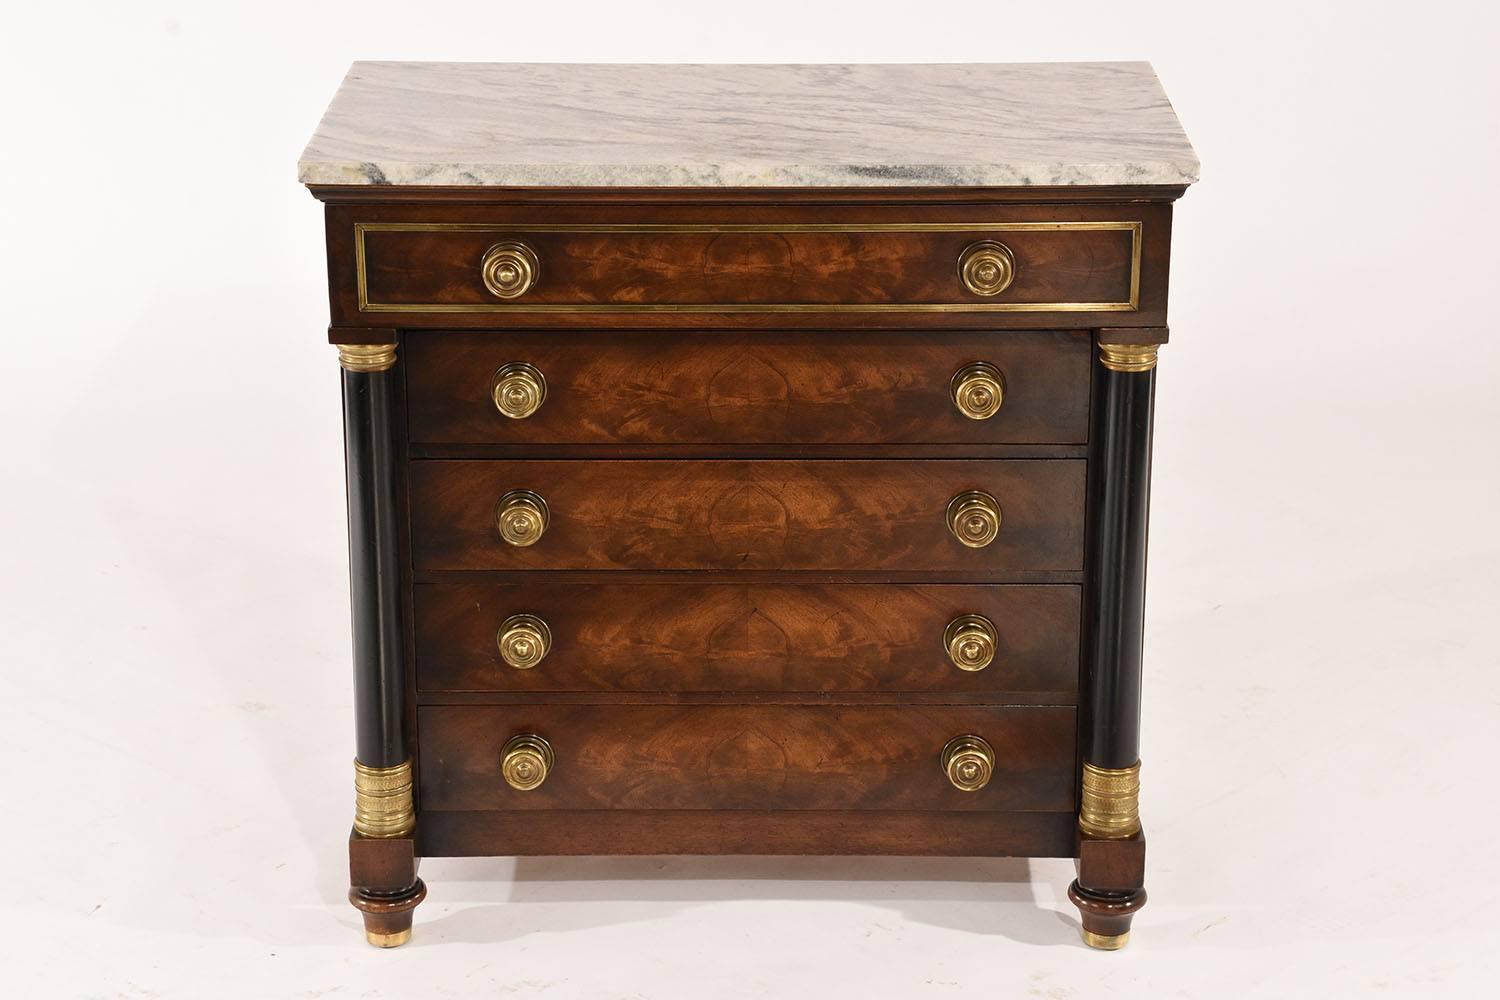 This 1970s Vintage Empire-style small chest of drawers or night stands are made of mahogany finished in a rich mahogany stain with ebonized details. The chest has five drawers with two decorative brass knobs each. On either side of the drawers are